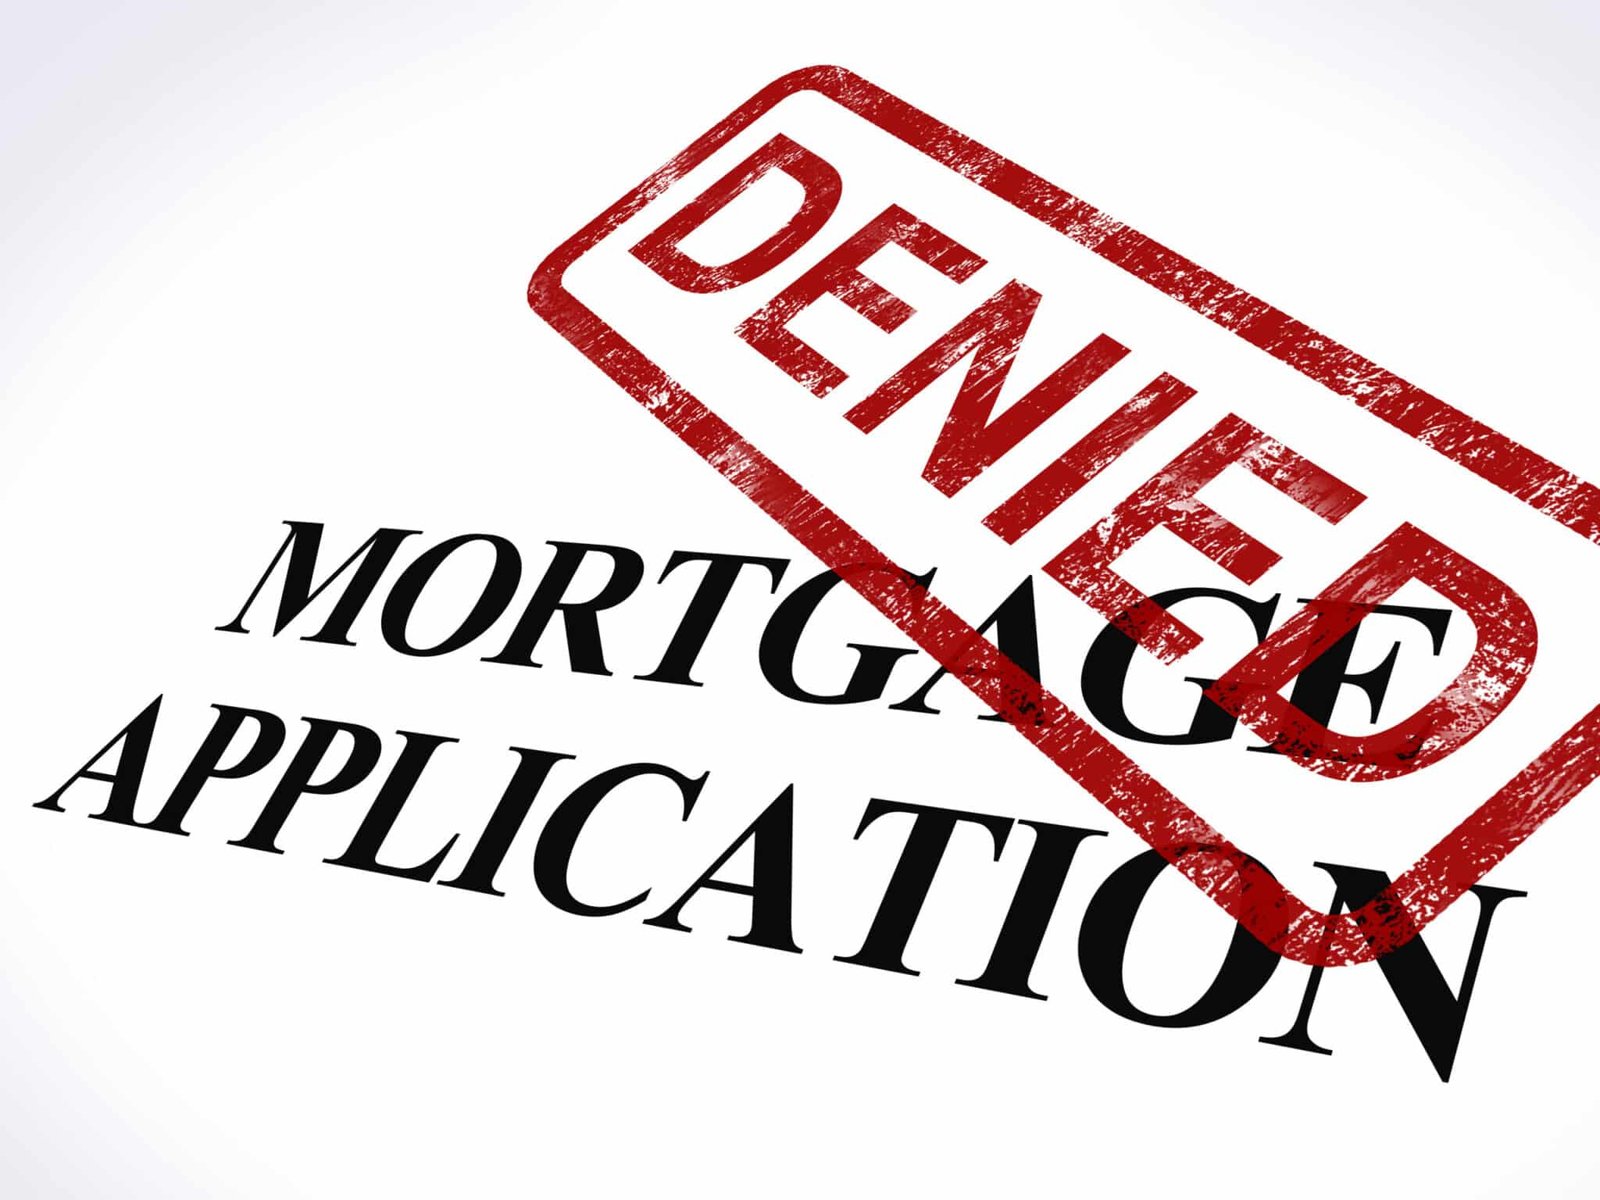 ![Mortgage Application with Red "Declined" Stamp](image-link)![Mortgage Application with Red "Declined" Stamp](image-link)